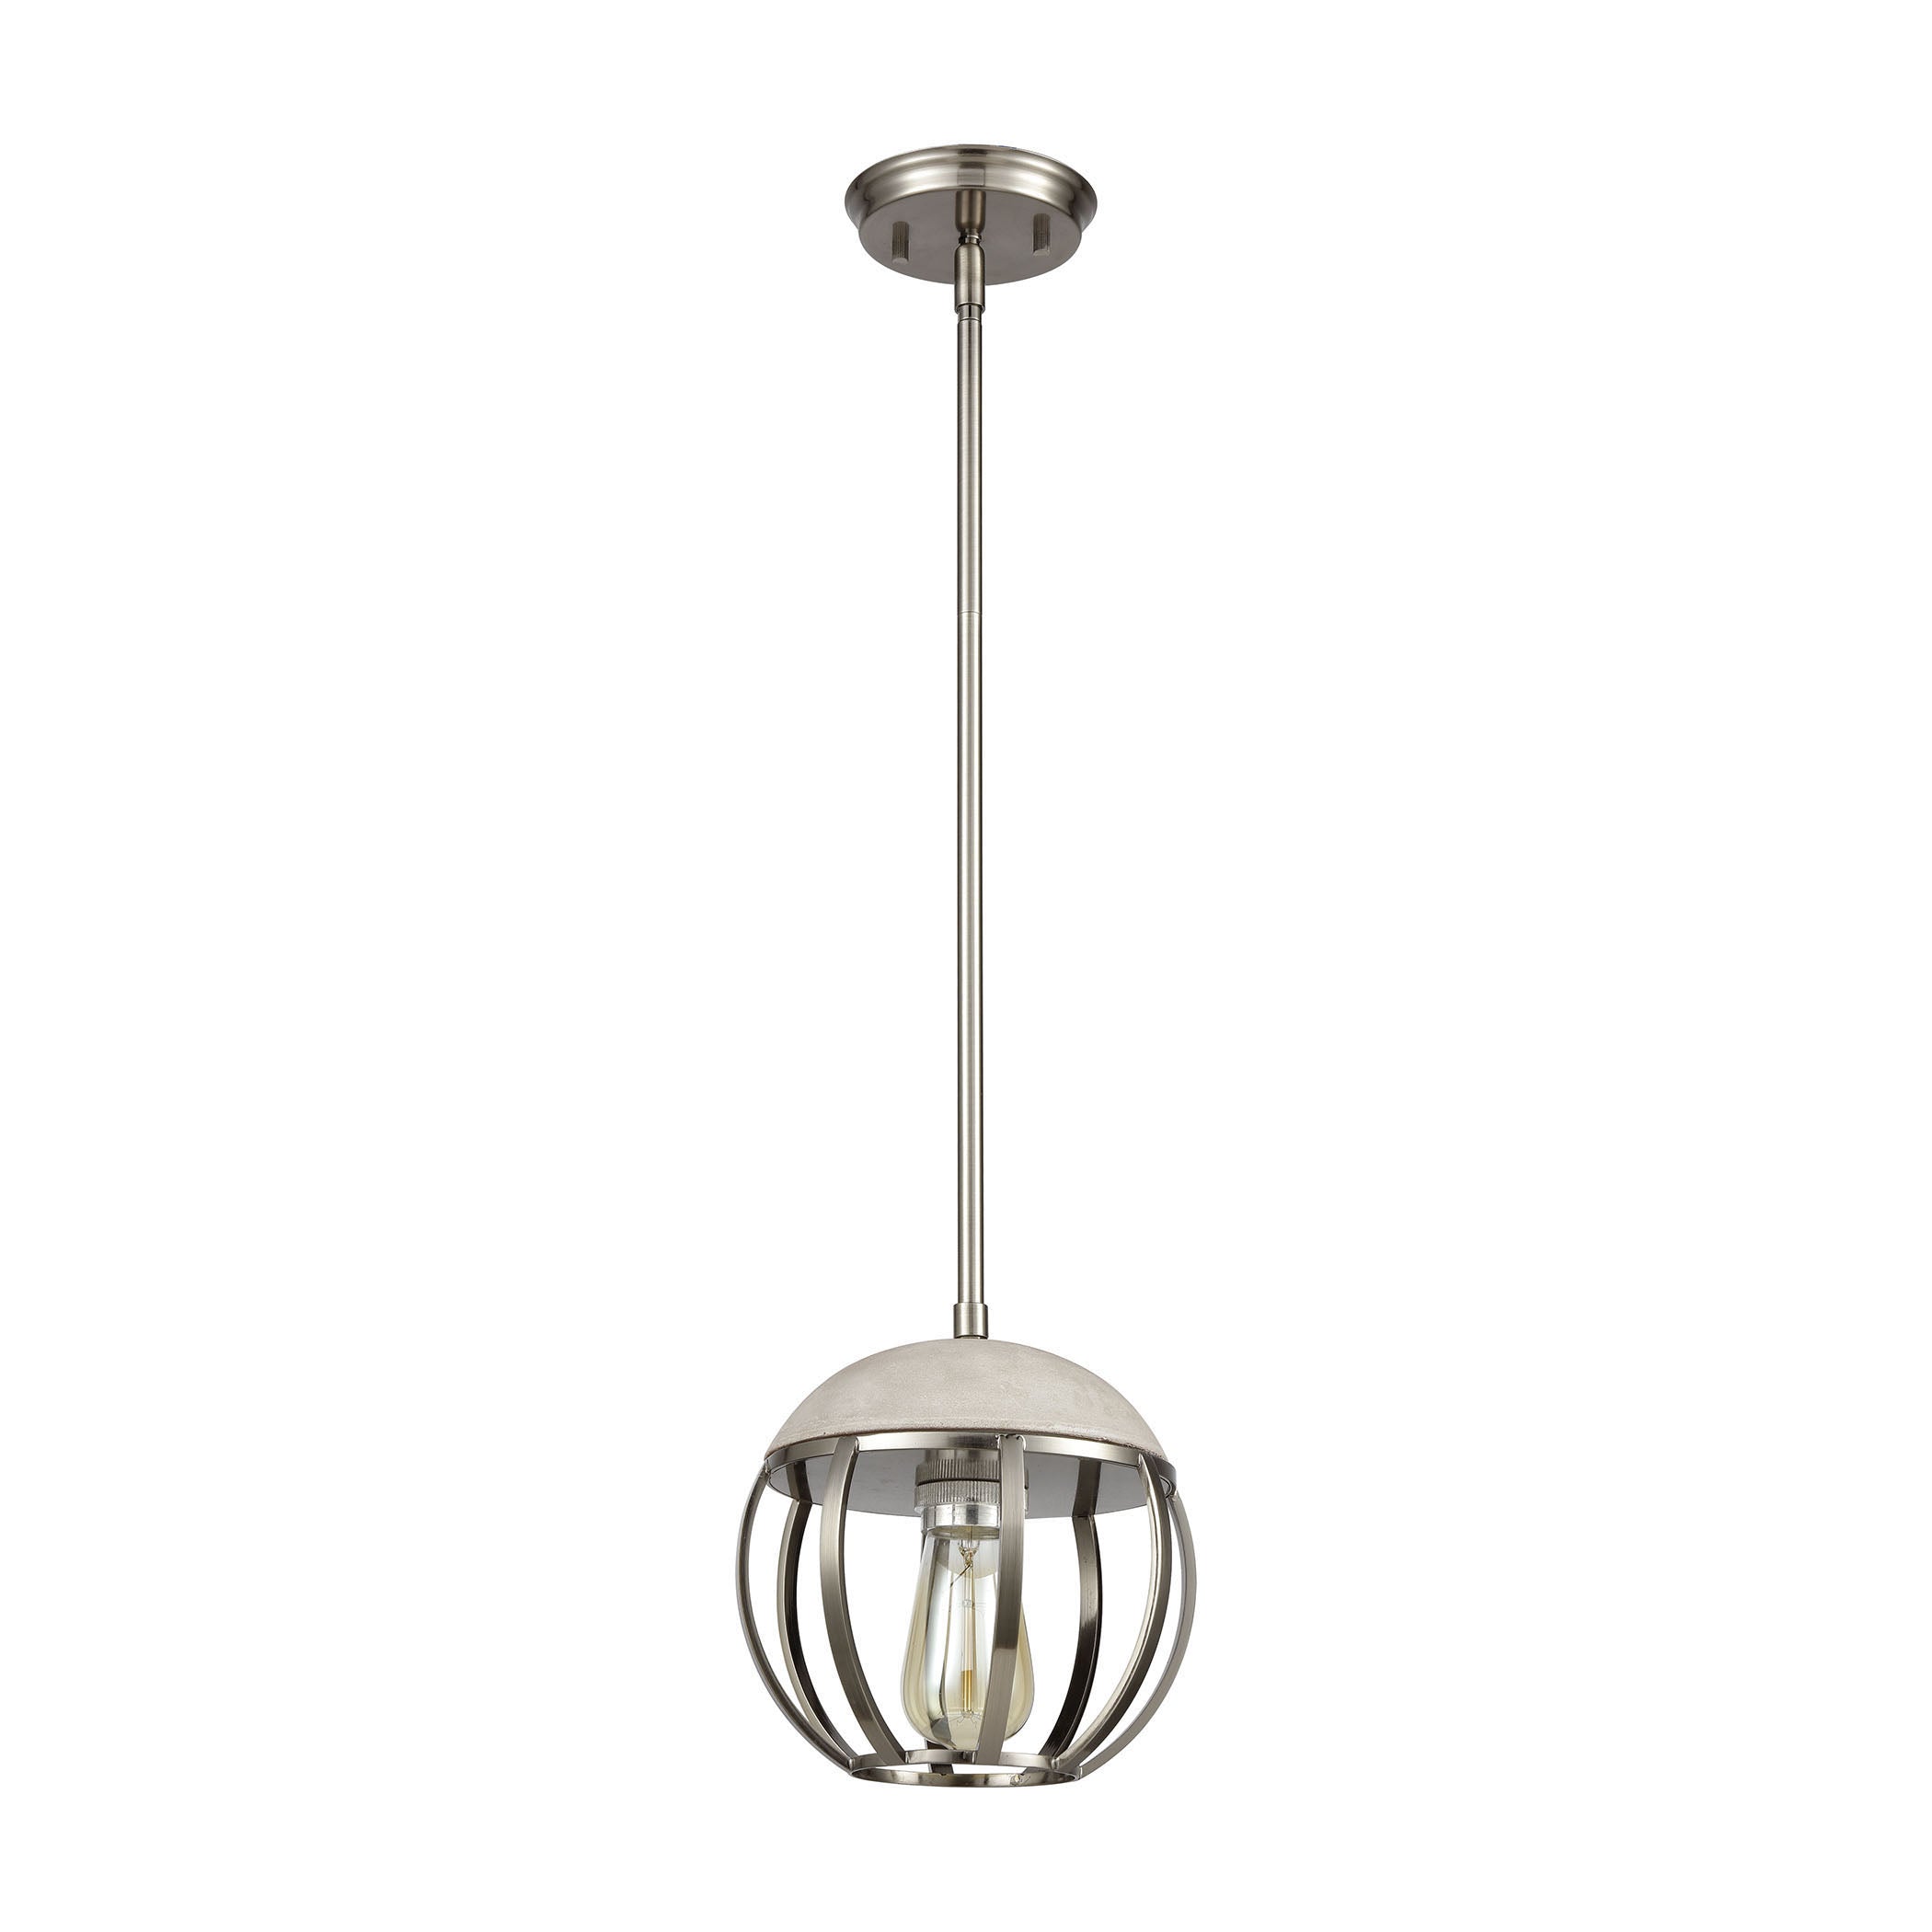 ELK Lighting 45337/1 Urban Form 1-Light Mini Pendant in Brushed Black Nickel with Concrete and Metal Cage